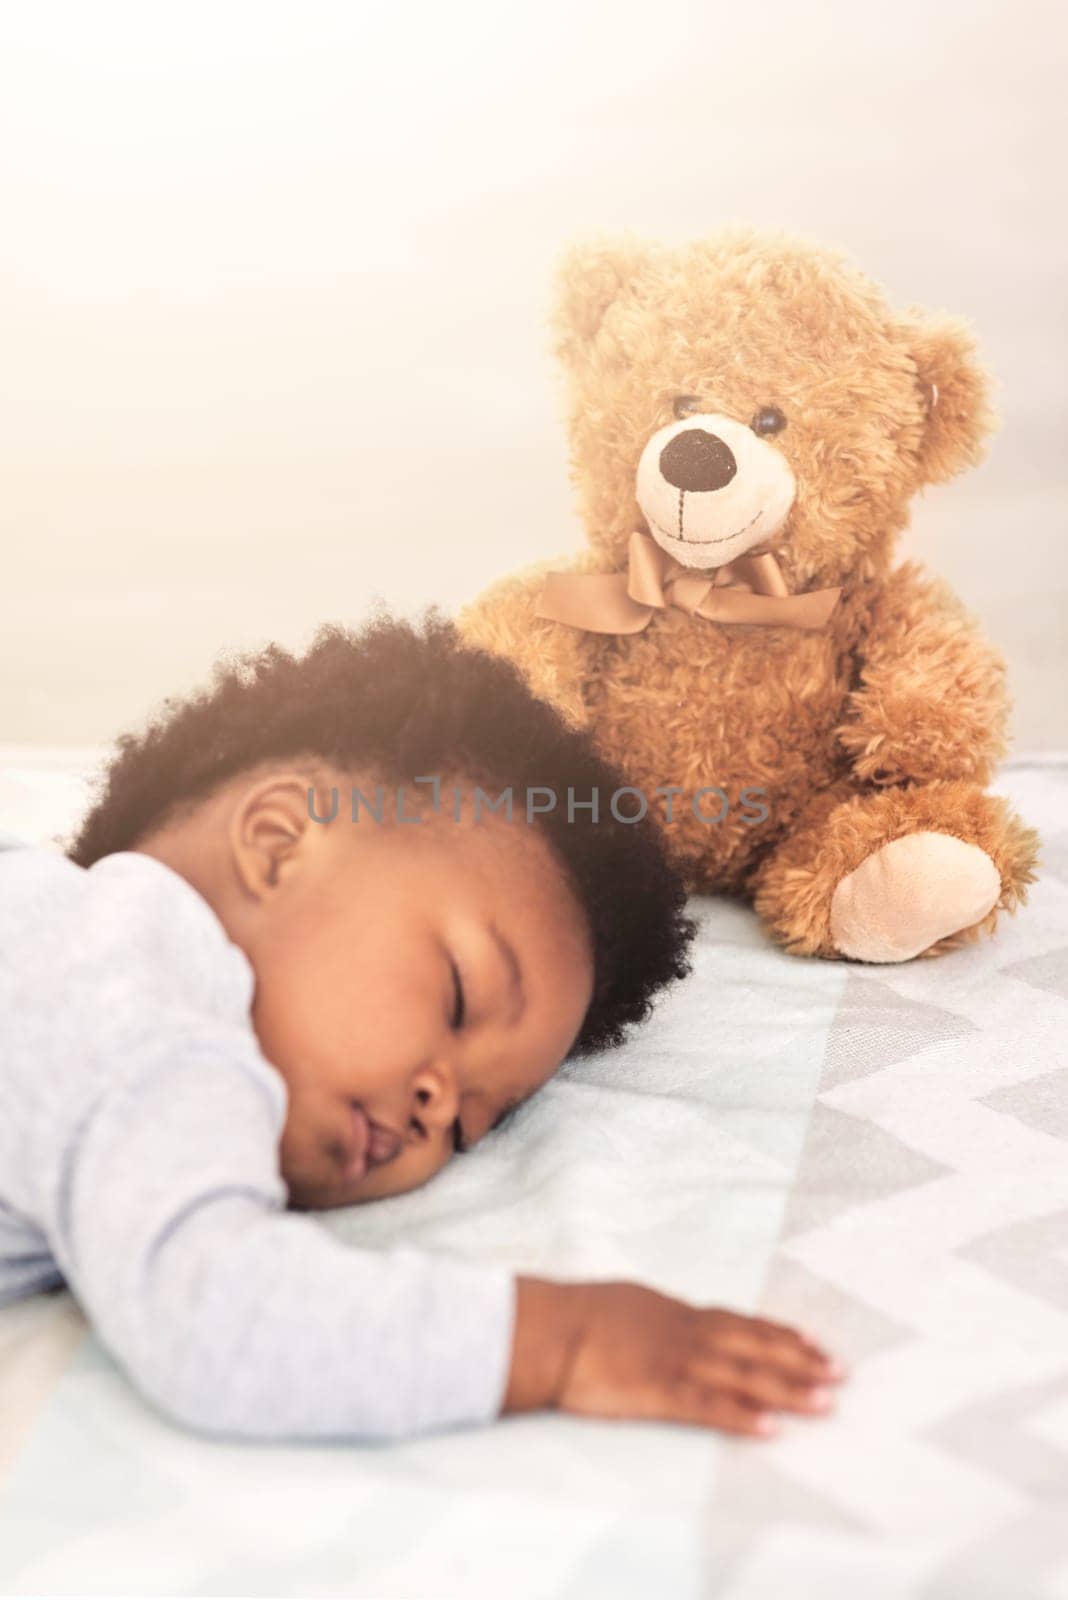 Sleeping, teddy bear and tired with baby in bedroom for carefree, development and innocence. Dreaming, relax and comfortable with african infant and toy at home for morning, resting and bedtime.